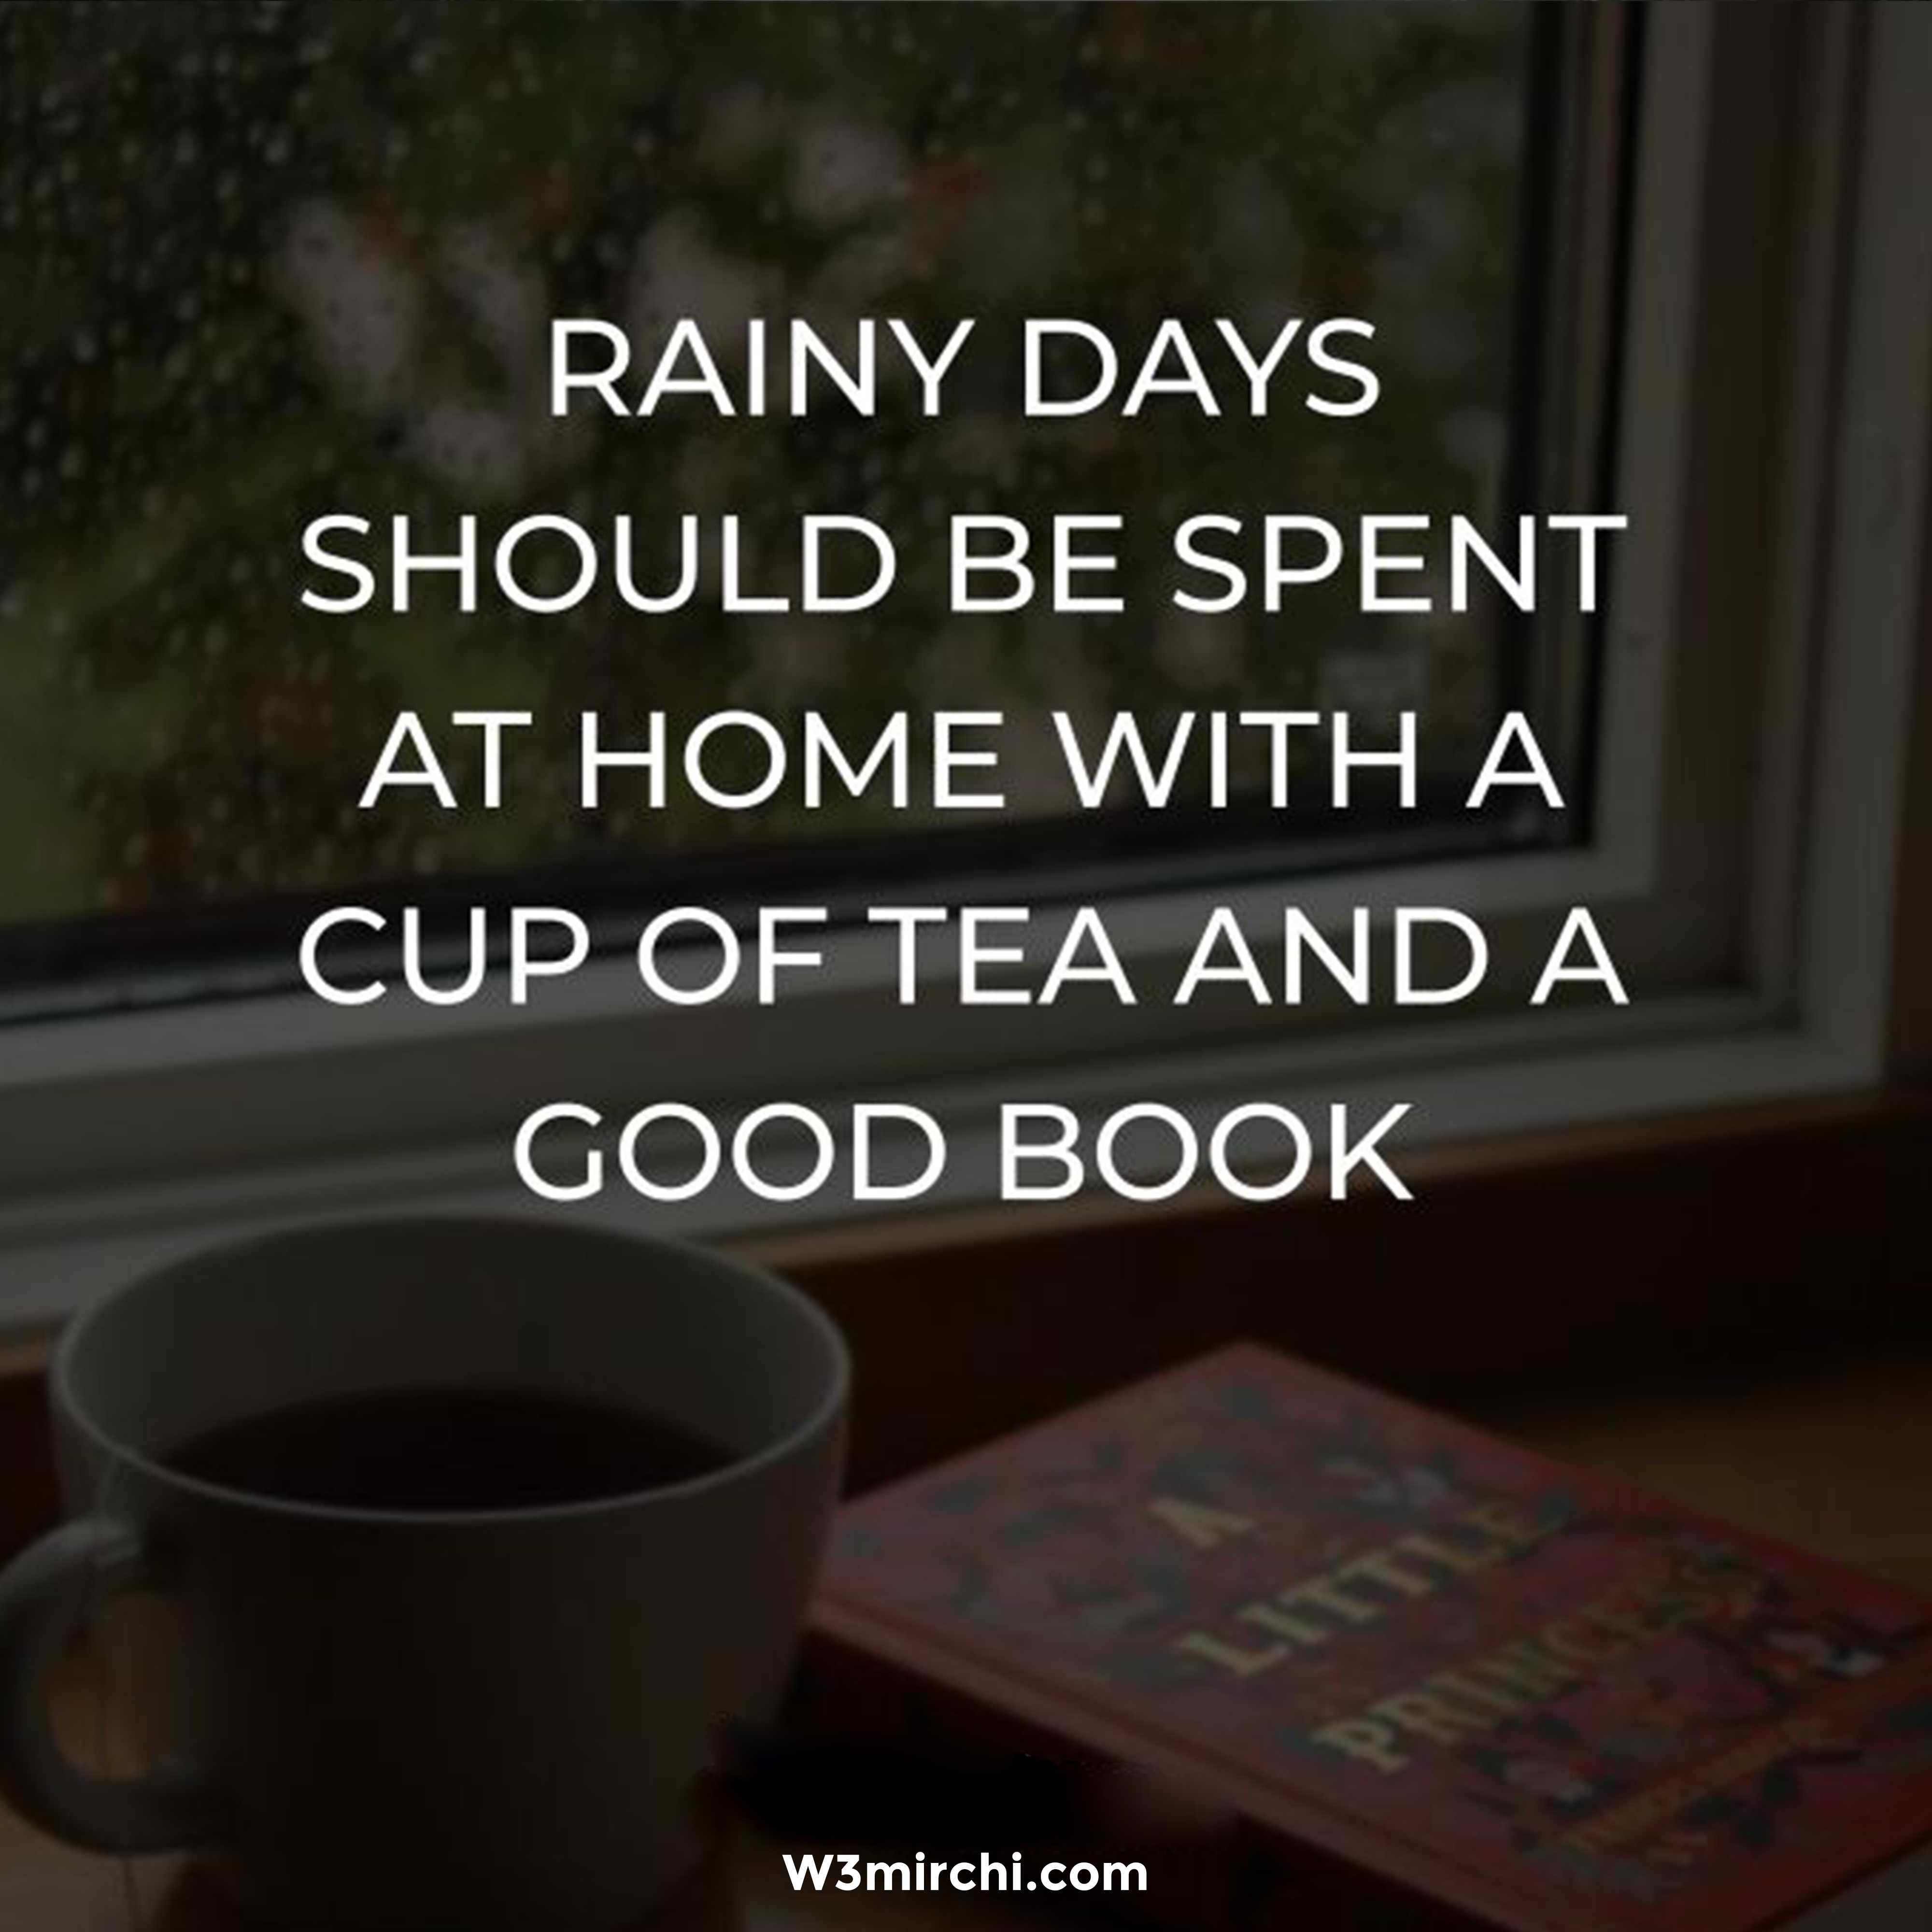 Rainy days should be spent at home